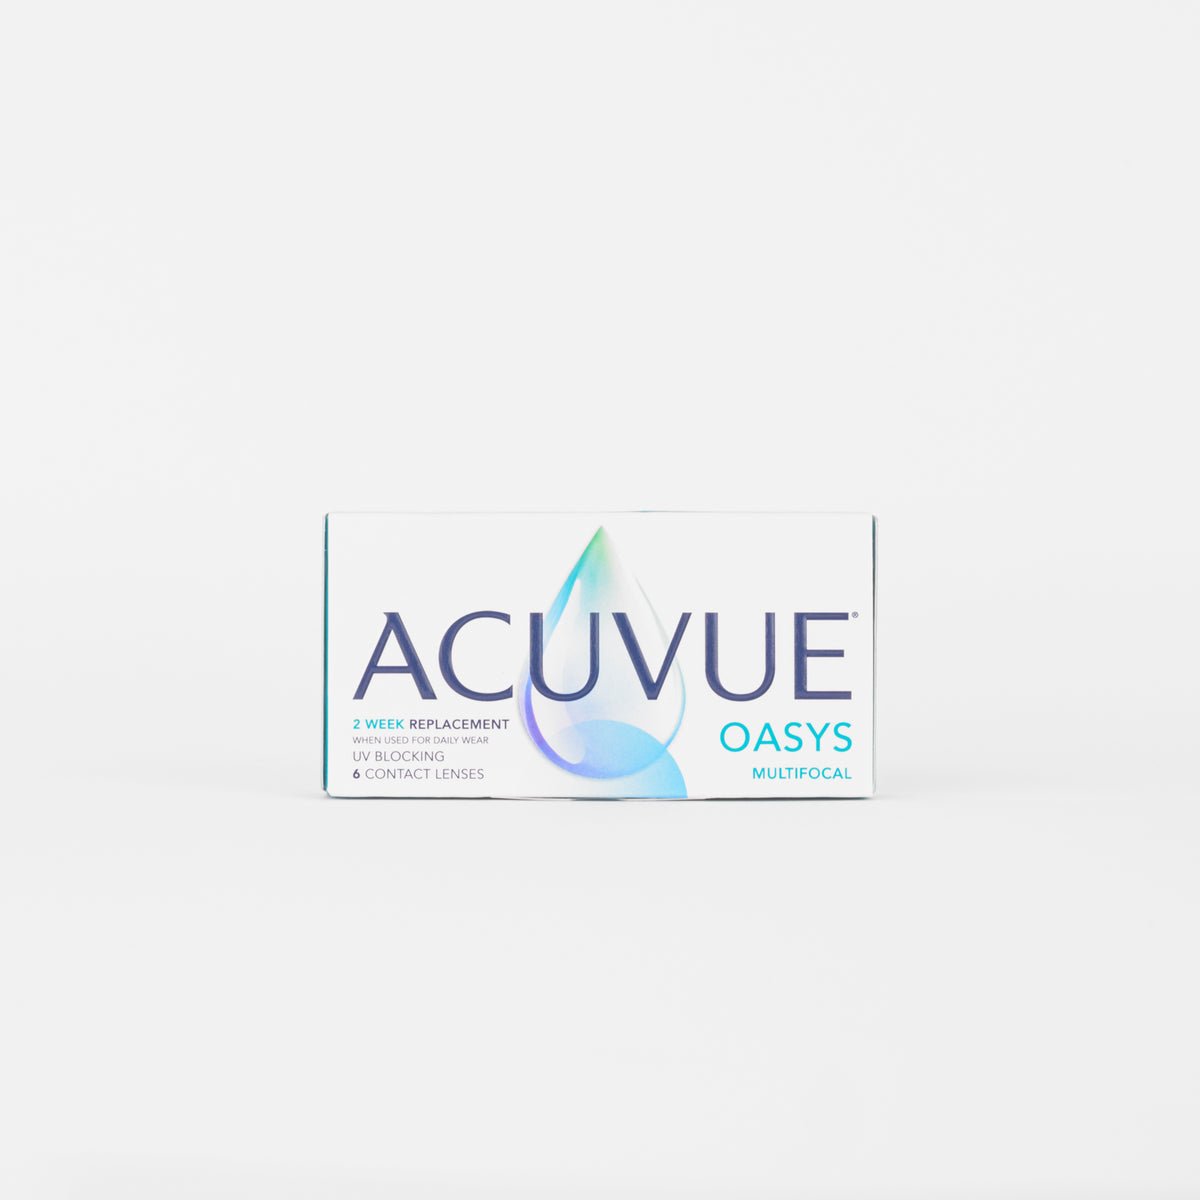 Acuvue Oasys Multifocal 6 Contact Lenses Johnson & Johnson   